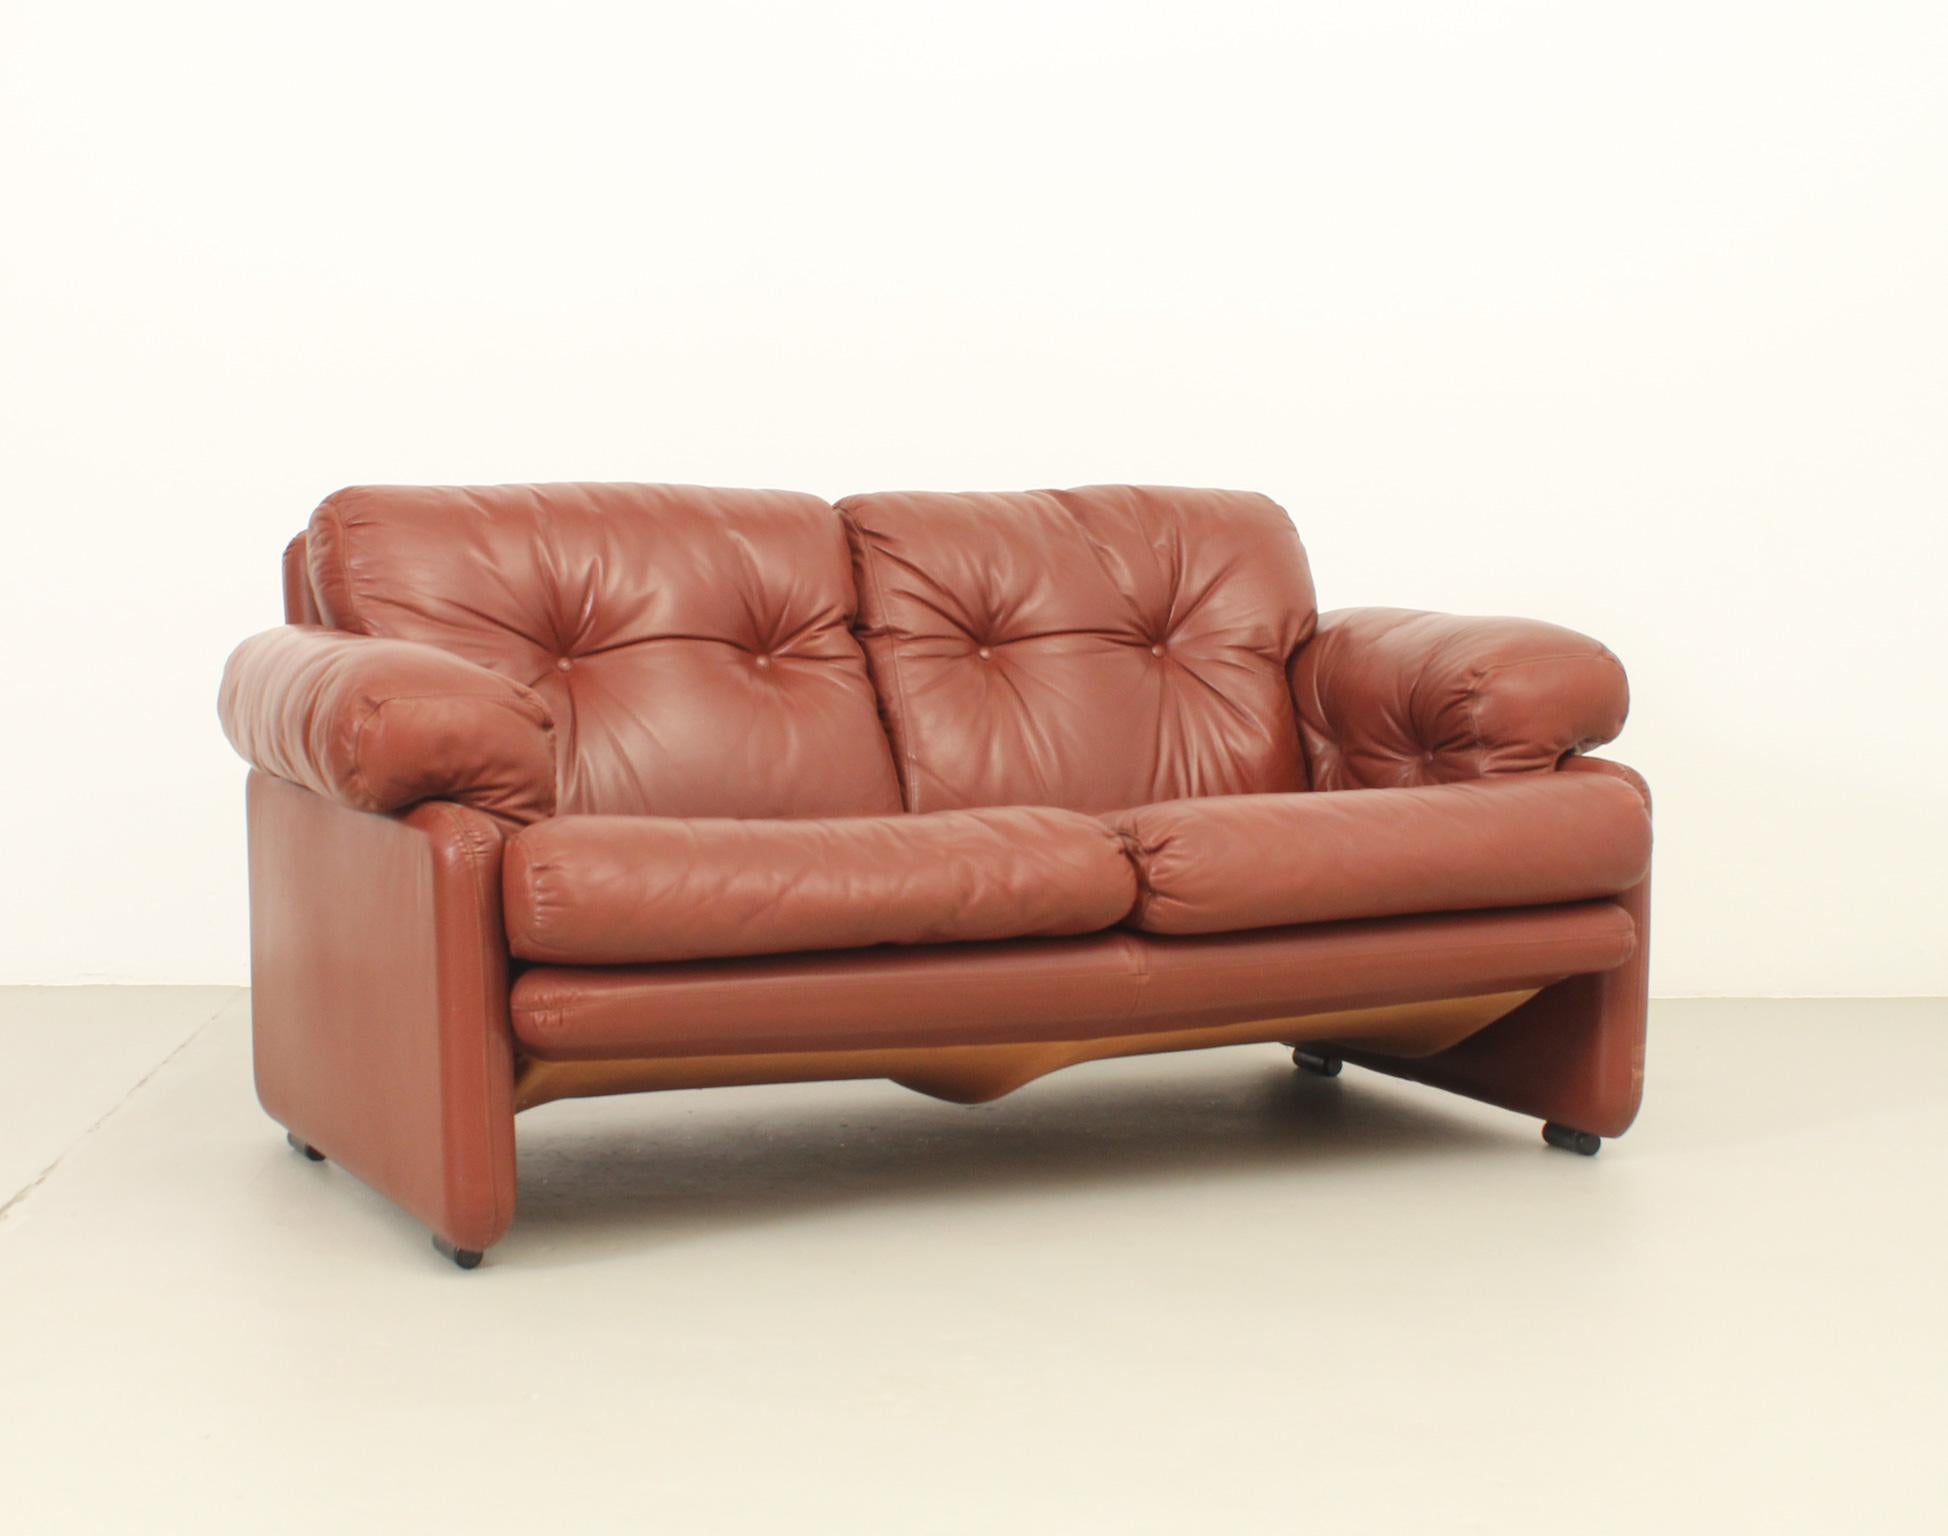 Coronado Two-seater Sofa by Tobia Scarpa in Cognac Leather, 1969 In Good Condition For Sale In Barcelona, ES